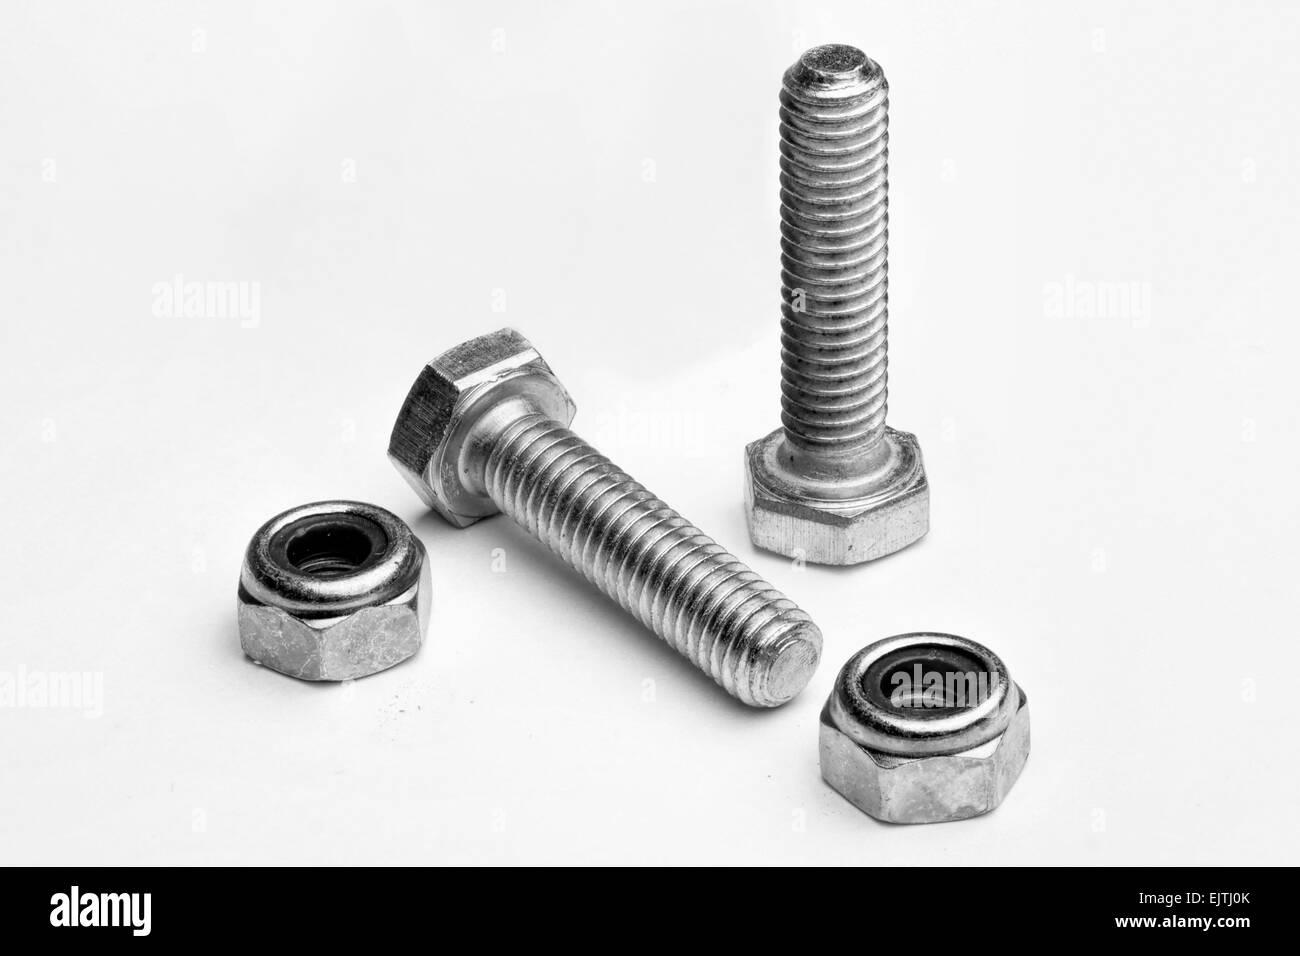 two new locking nuts and bolts isolated on a white background Stock Photo